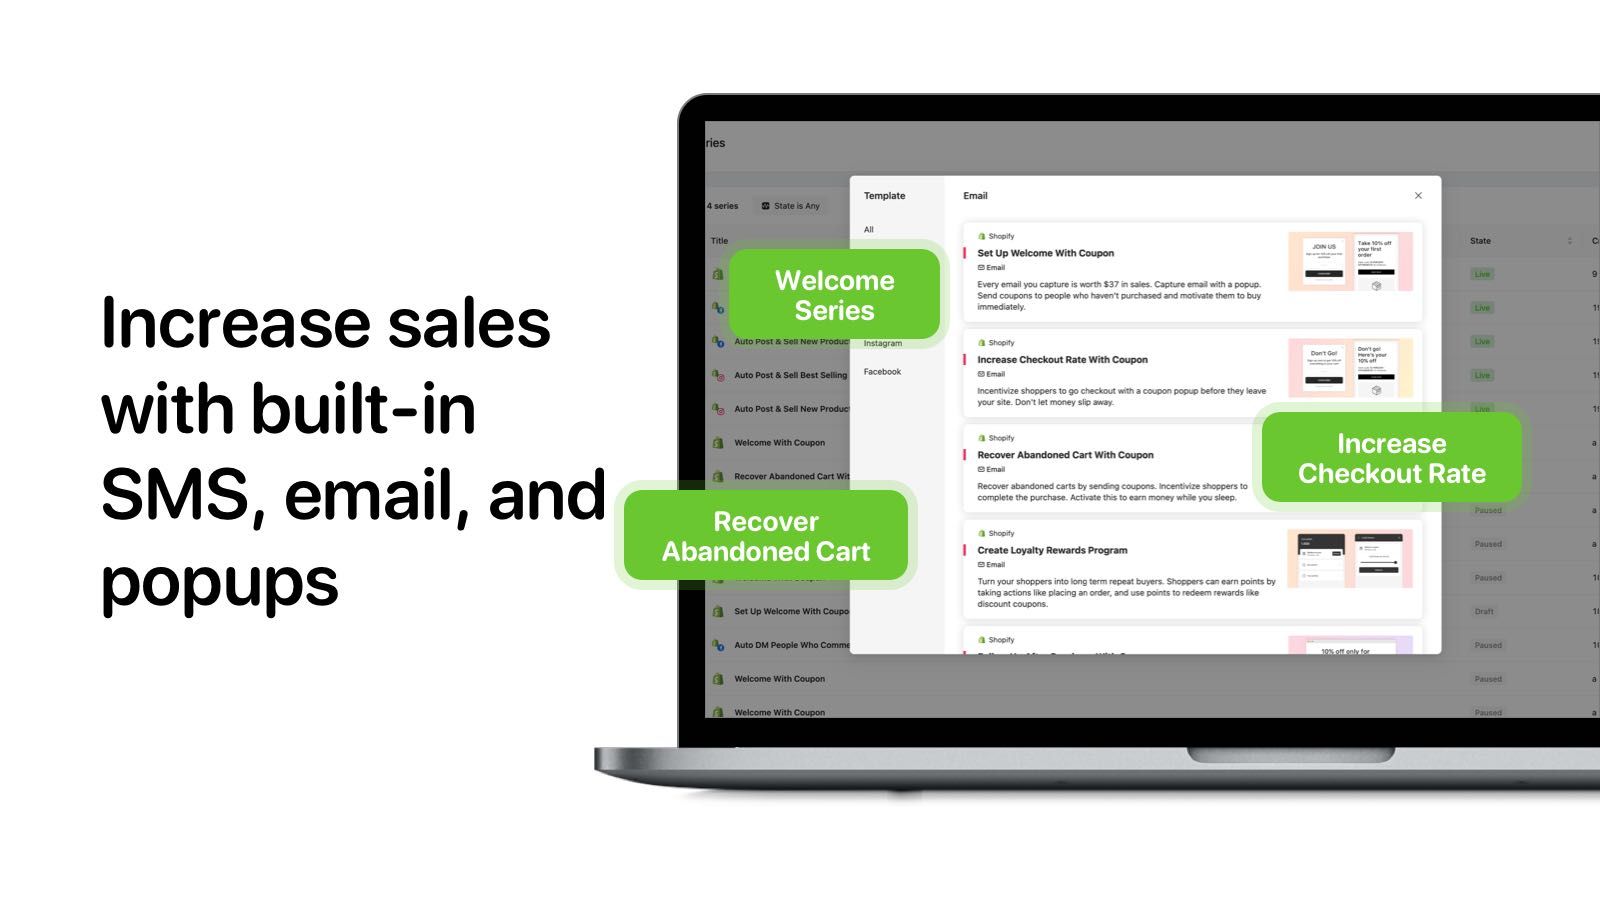 Increase sales with built-in SMS, email and popups